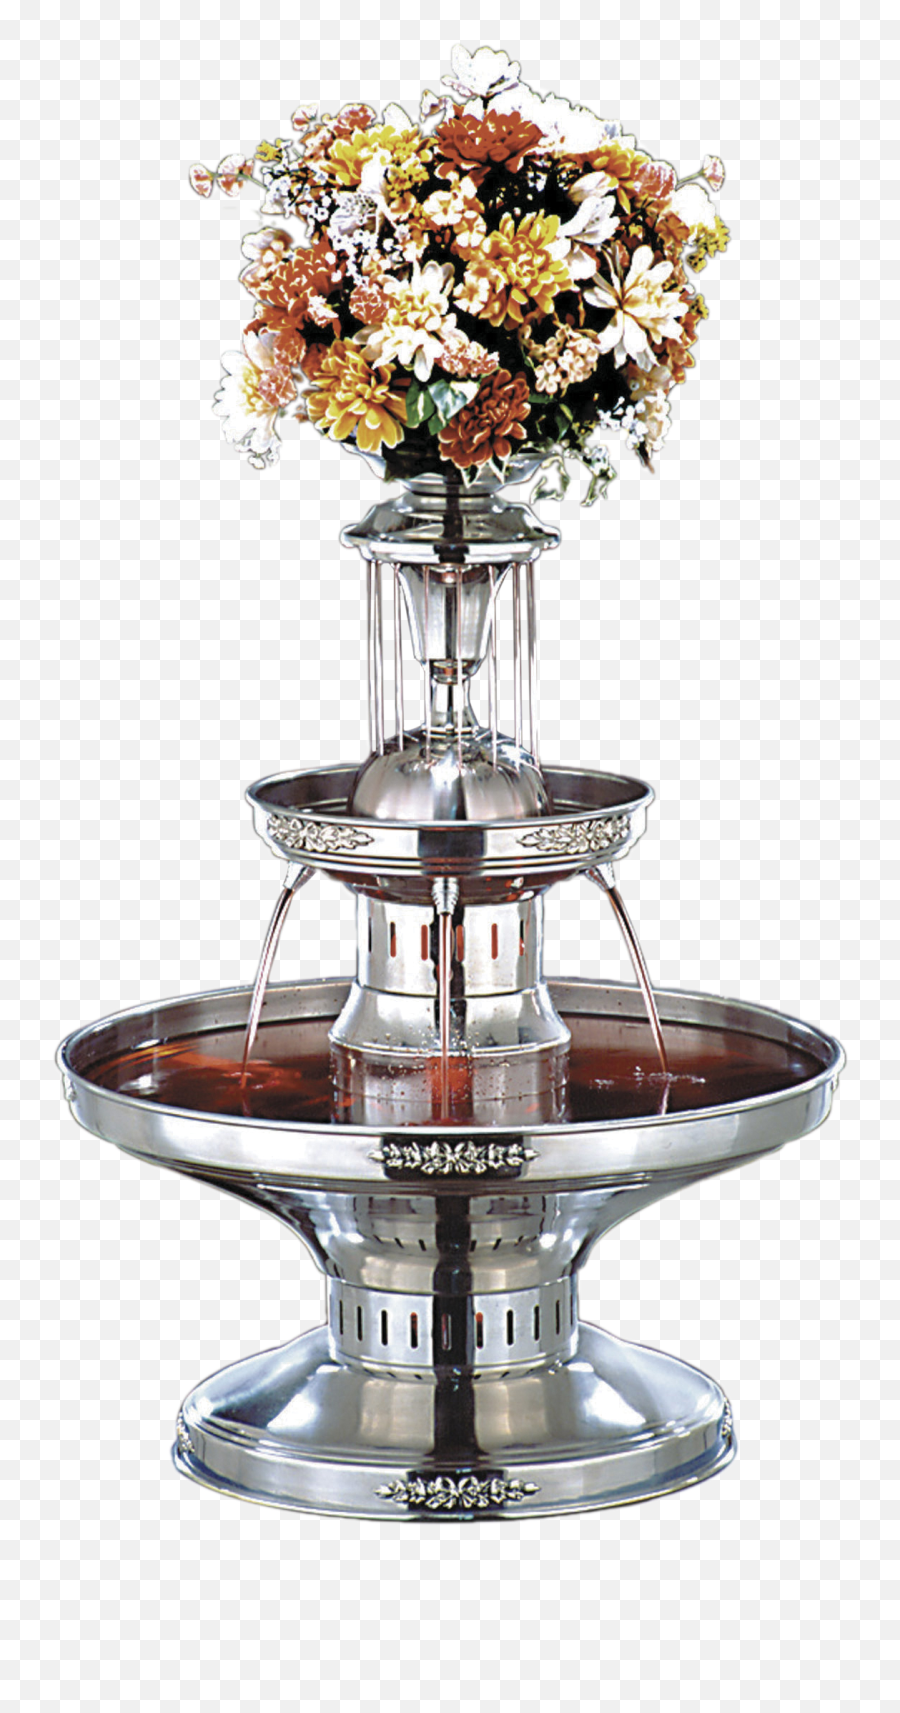 Download 5 Gallon Champagne Fountain - Champagne Fountain Png,Fountain Png